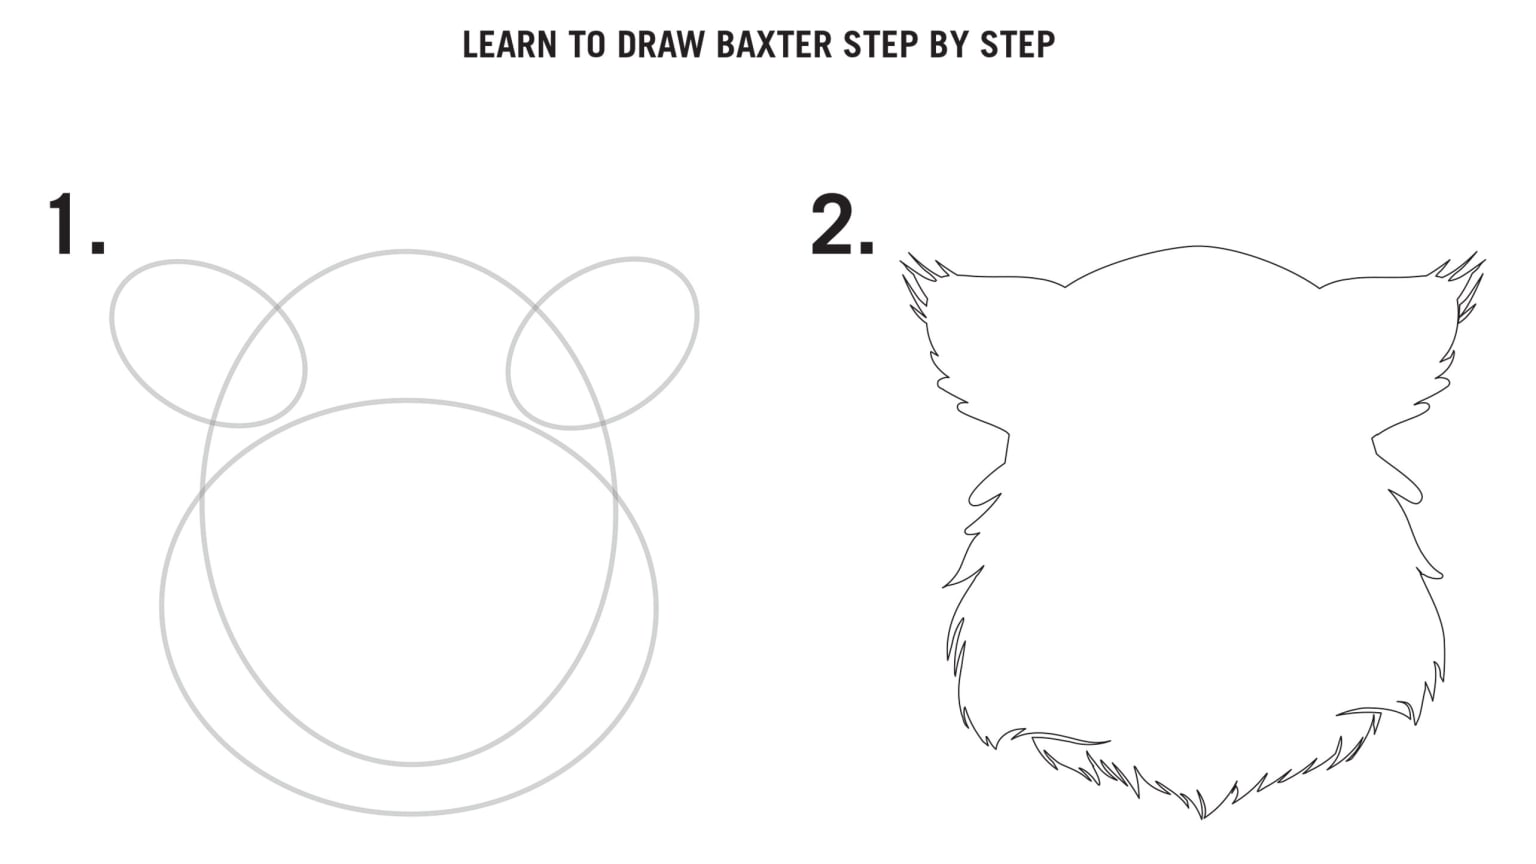 Learn How to Draw Atlanta Braves Logo (MLB) Step by Step : Drawing Tutorials